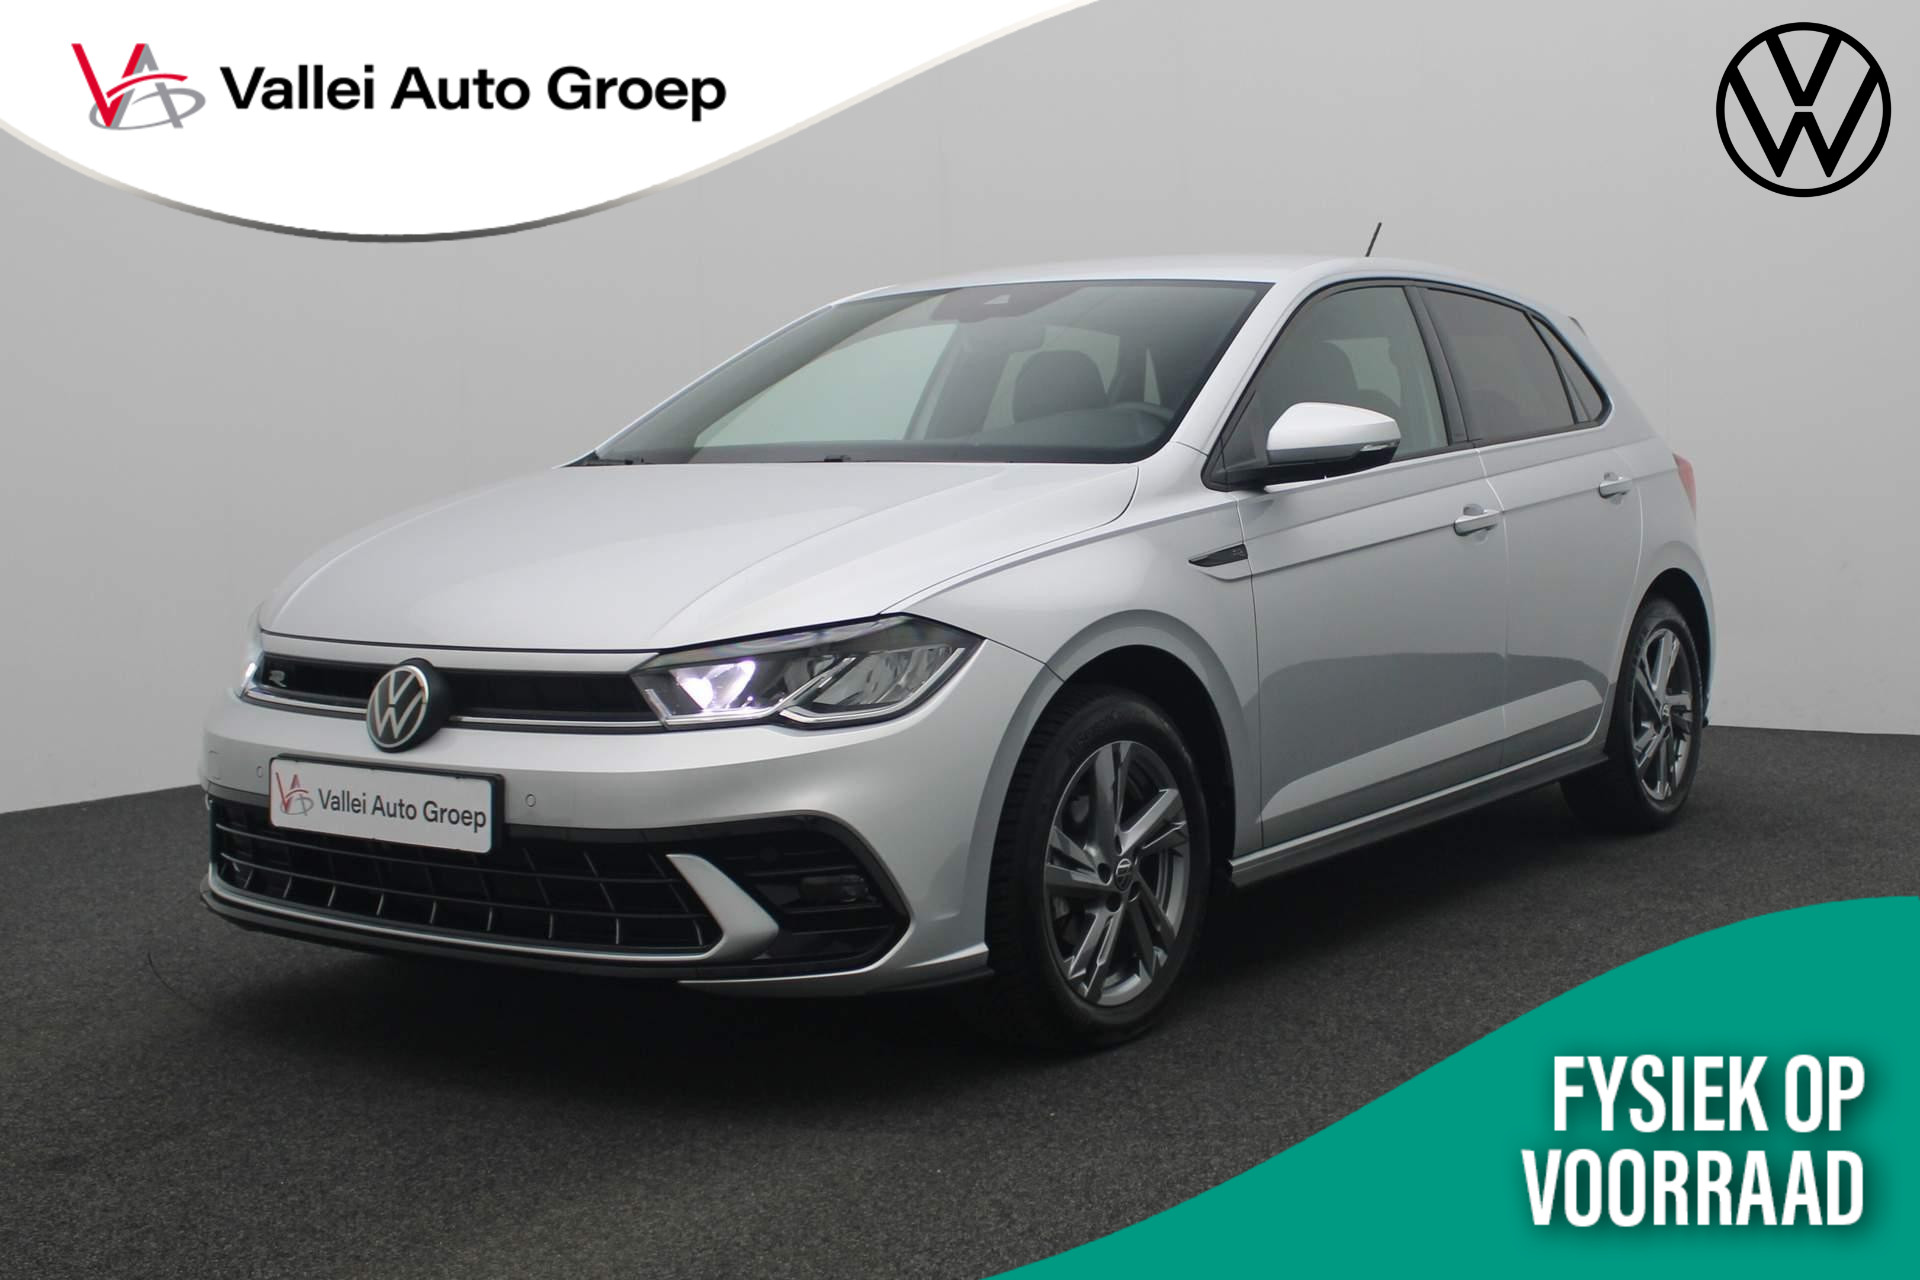 Volkswagen Polo 1.0 TSI 95PK R-Line | Parkeersensoren voor/achter | ACC | Clima | 16 inch | Apple Carplay / Android Auto